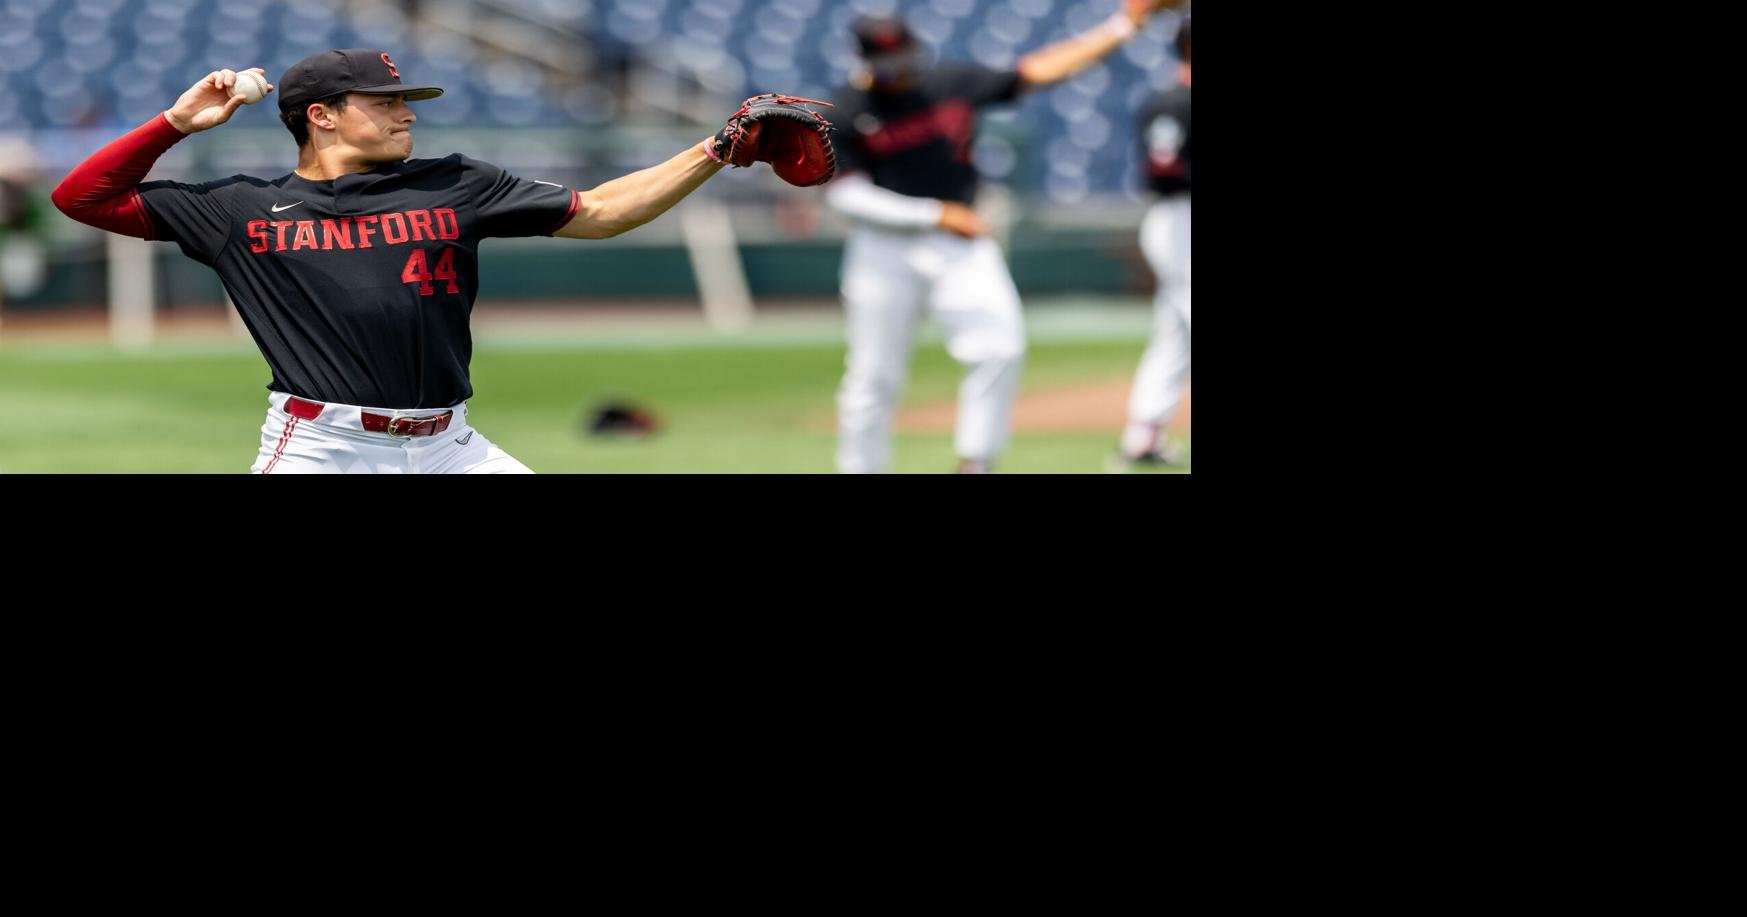 Stanford standout Braden Montgomery aims to shine in the CWS